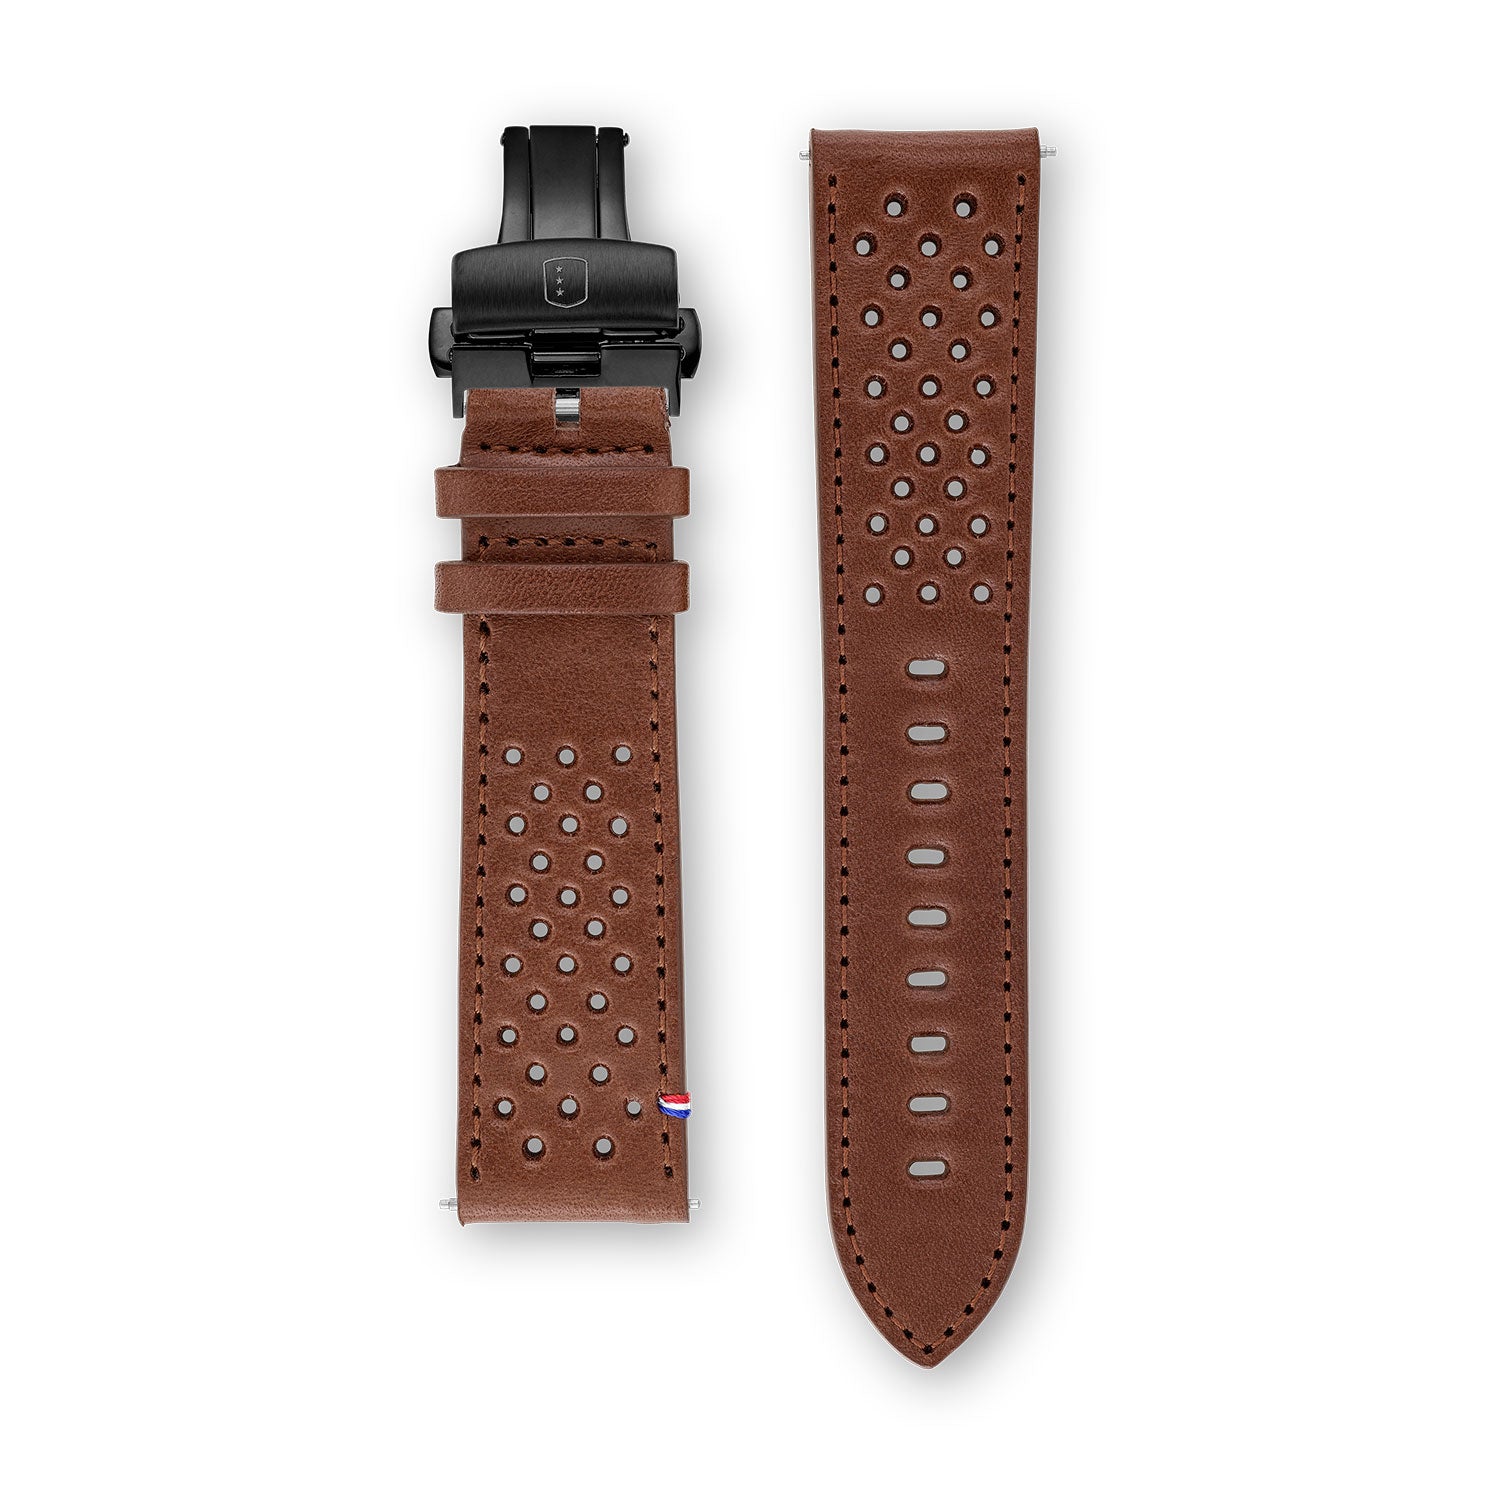 Leather Strap - Racing Brown - 22mm